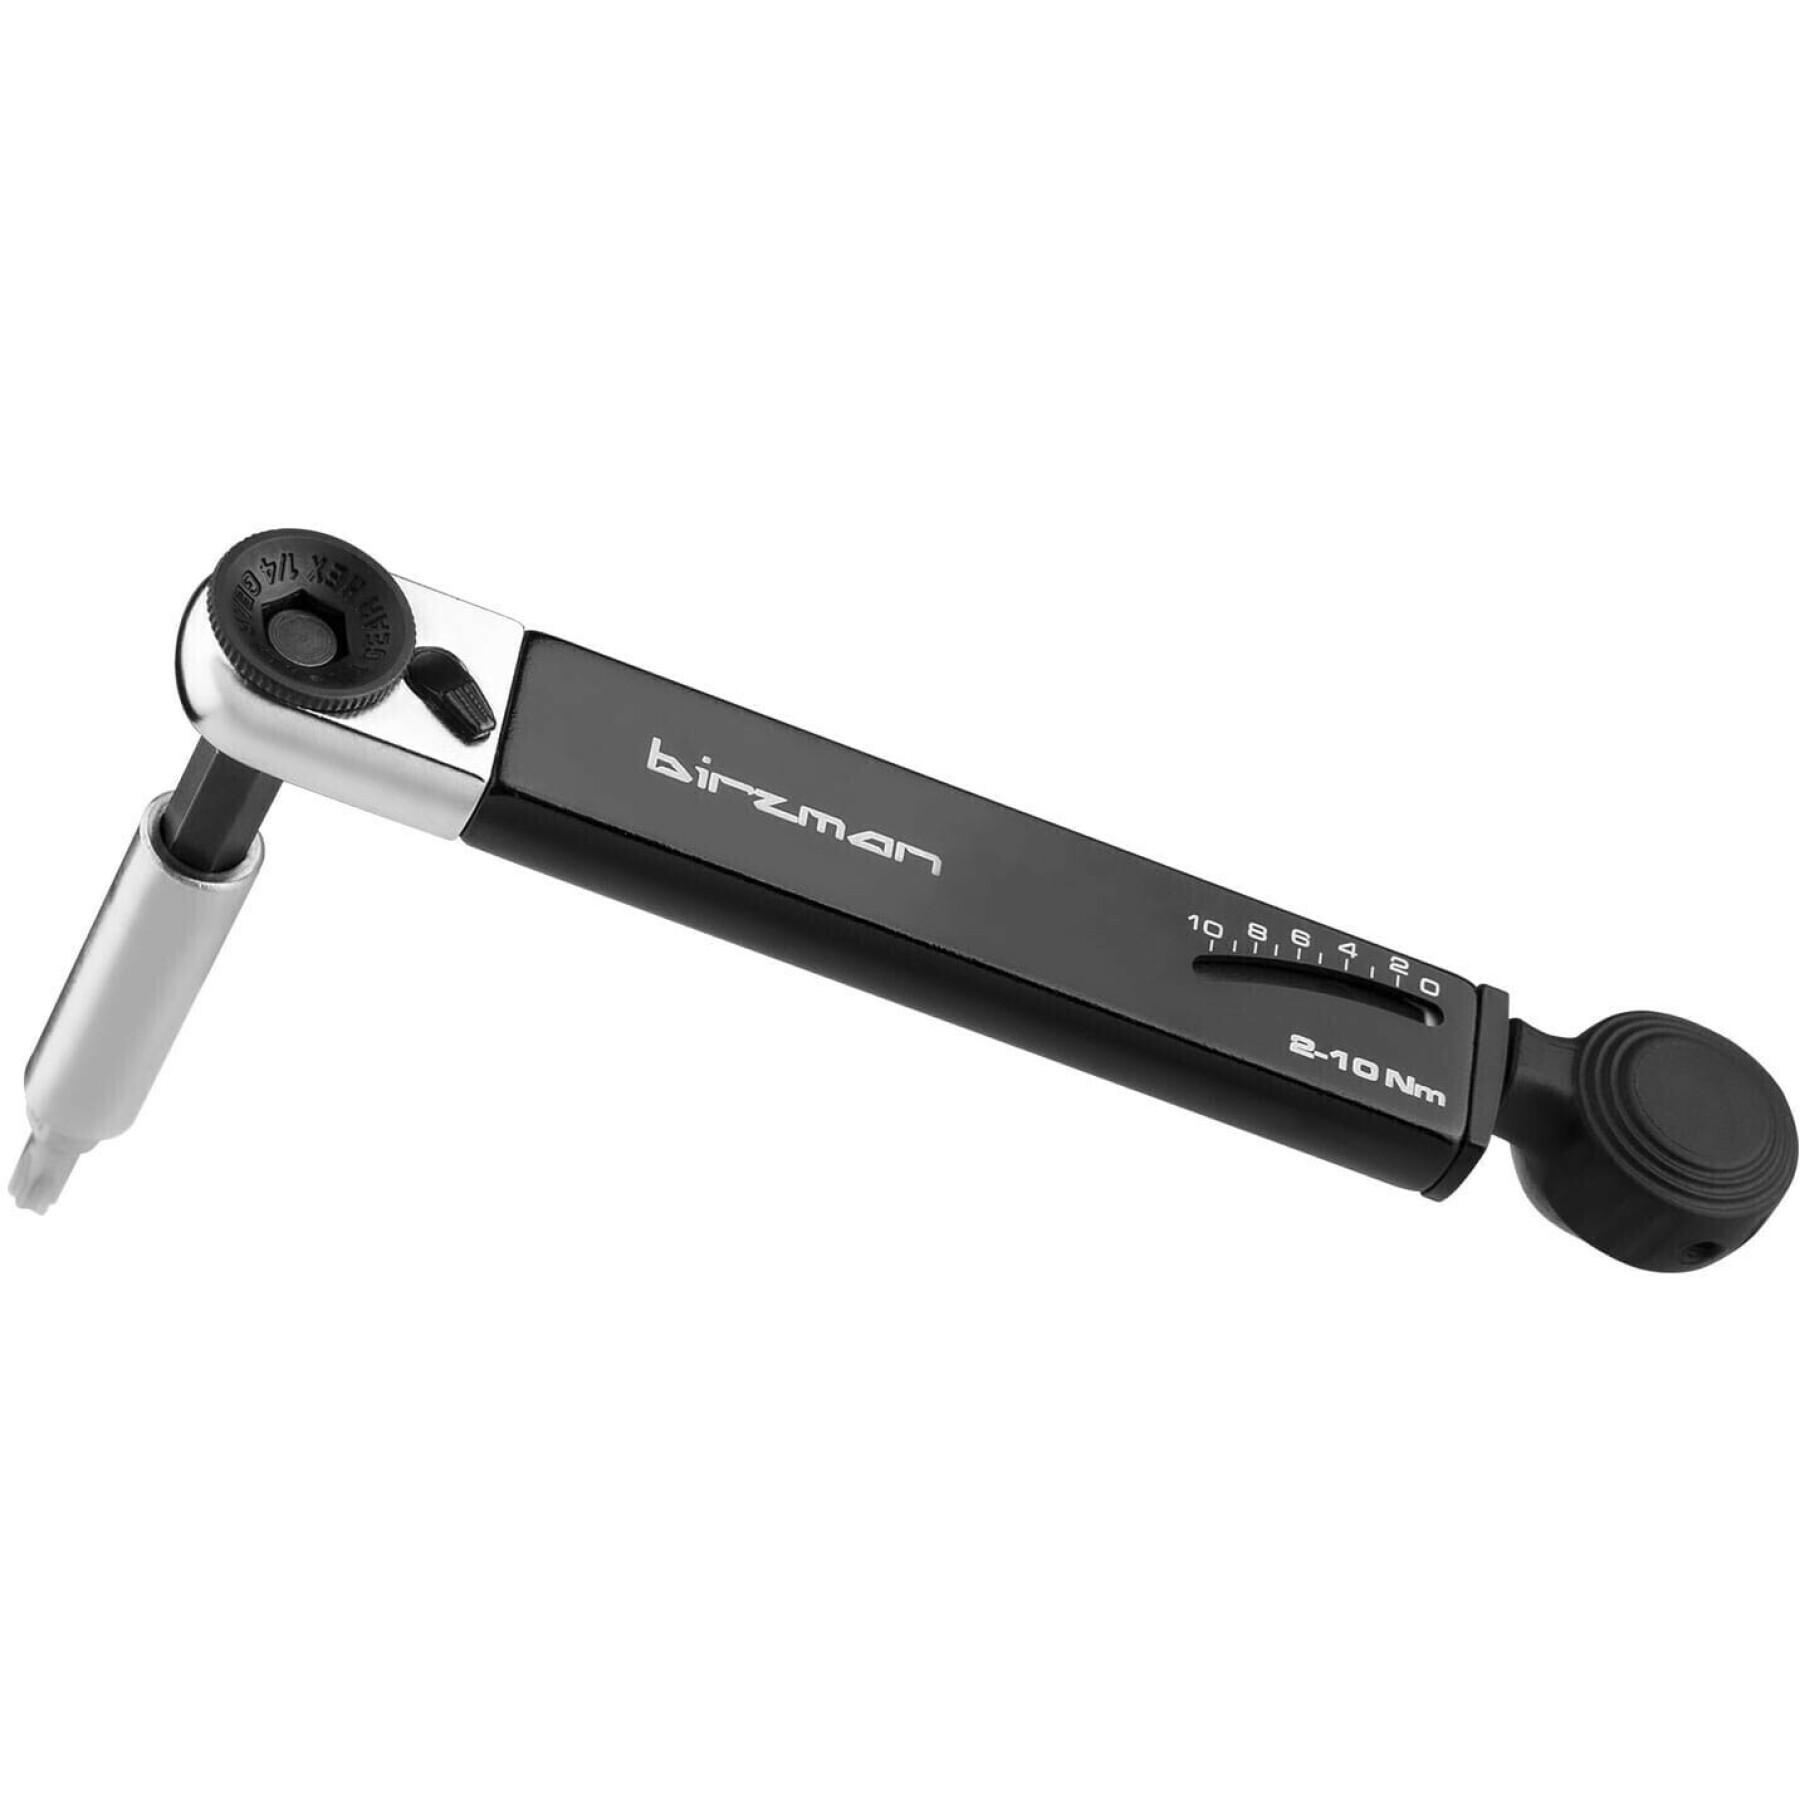 Pocket torque wrench with bits + extension 2 to 10 nm Birzman